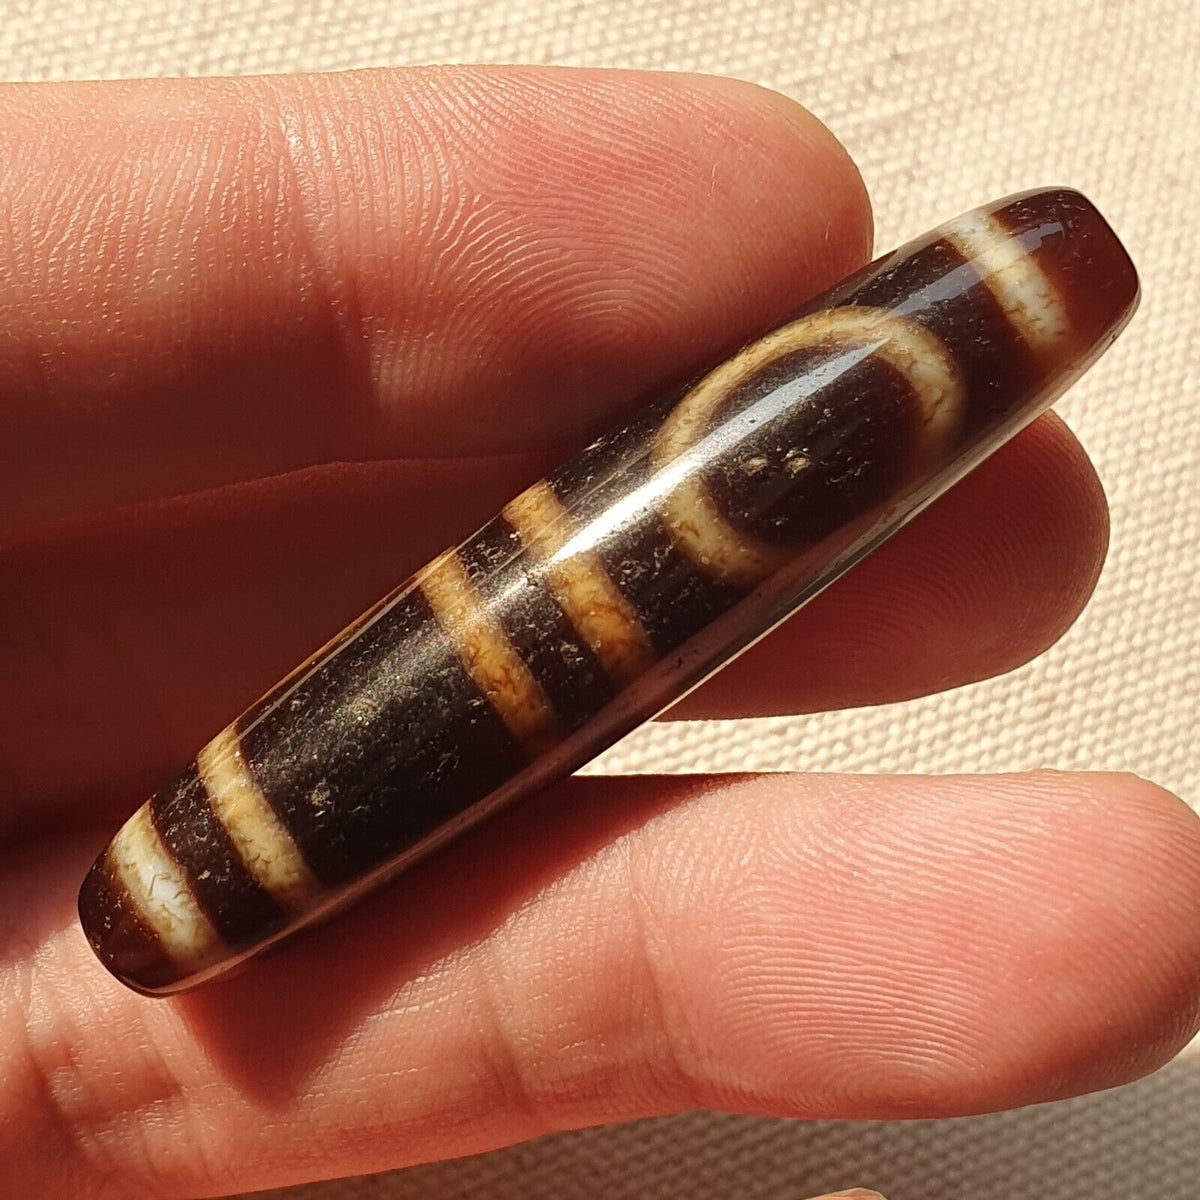 A Tibetan Heaven and Earth Dzi Bead/Amulet-With Cinnabar/Blood Spots Amulet